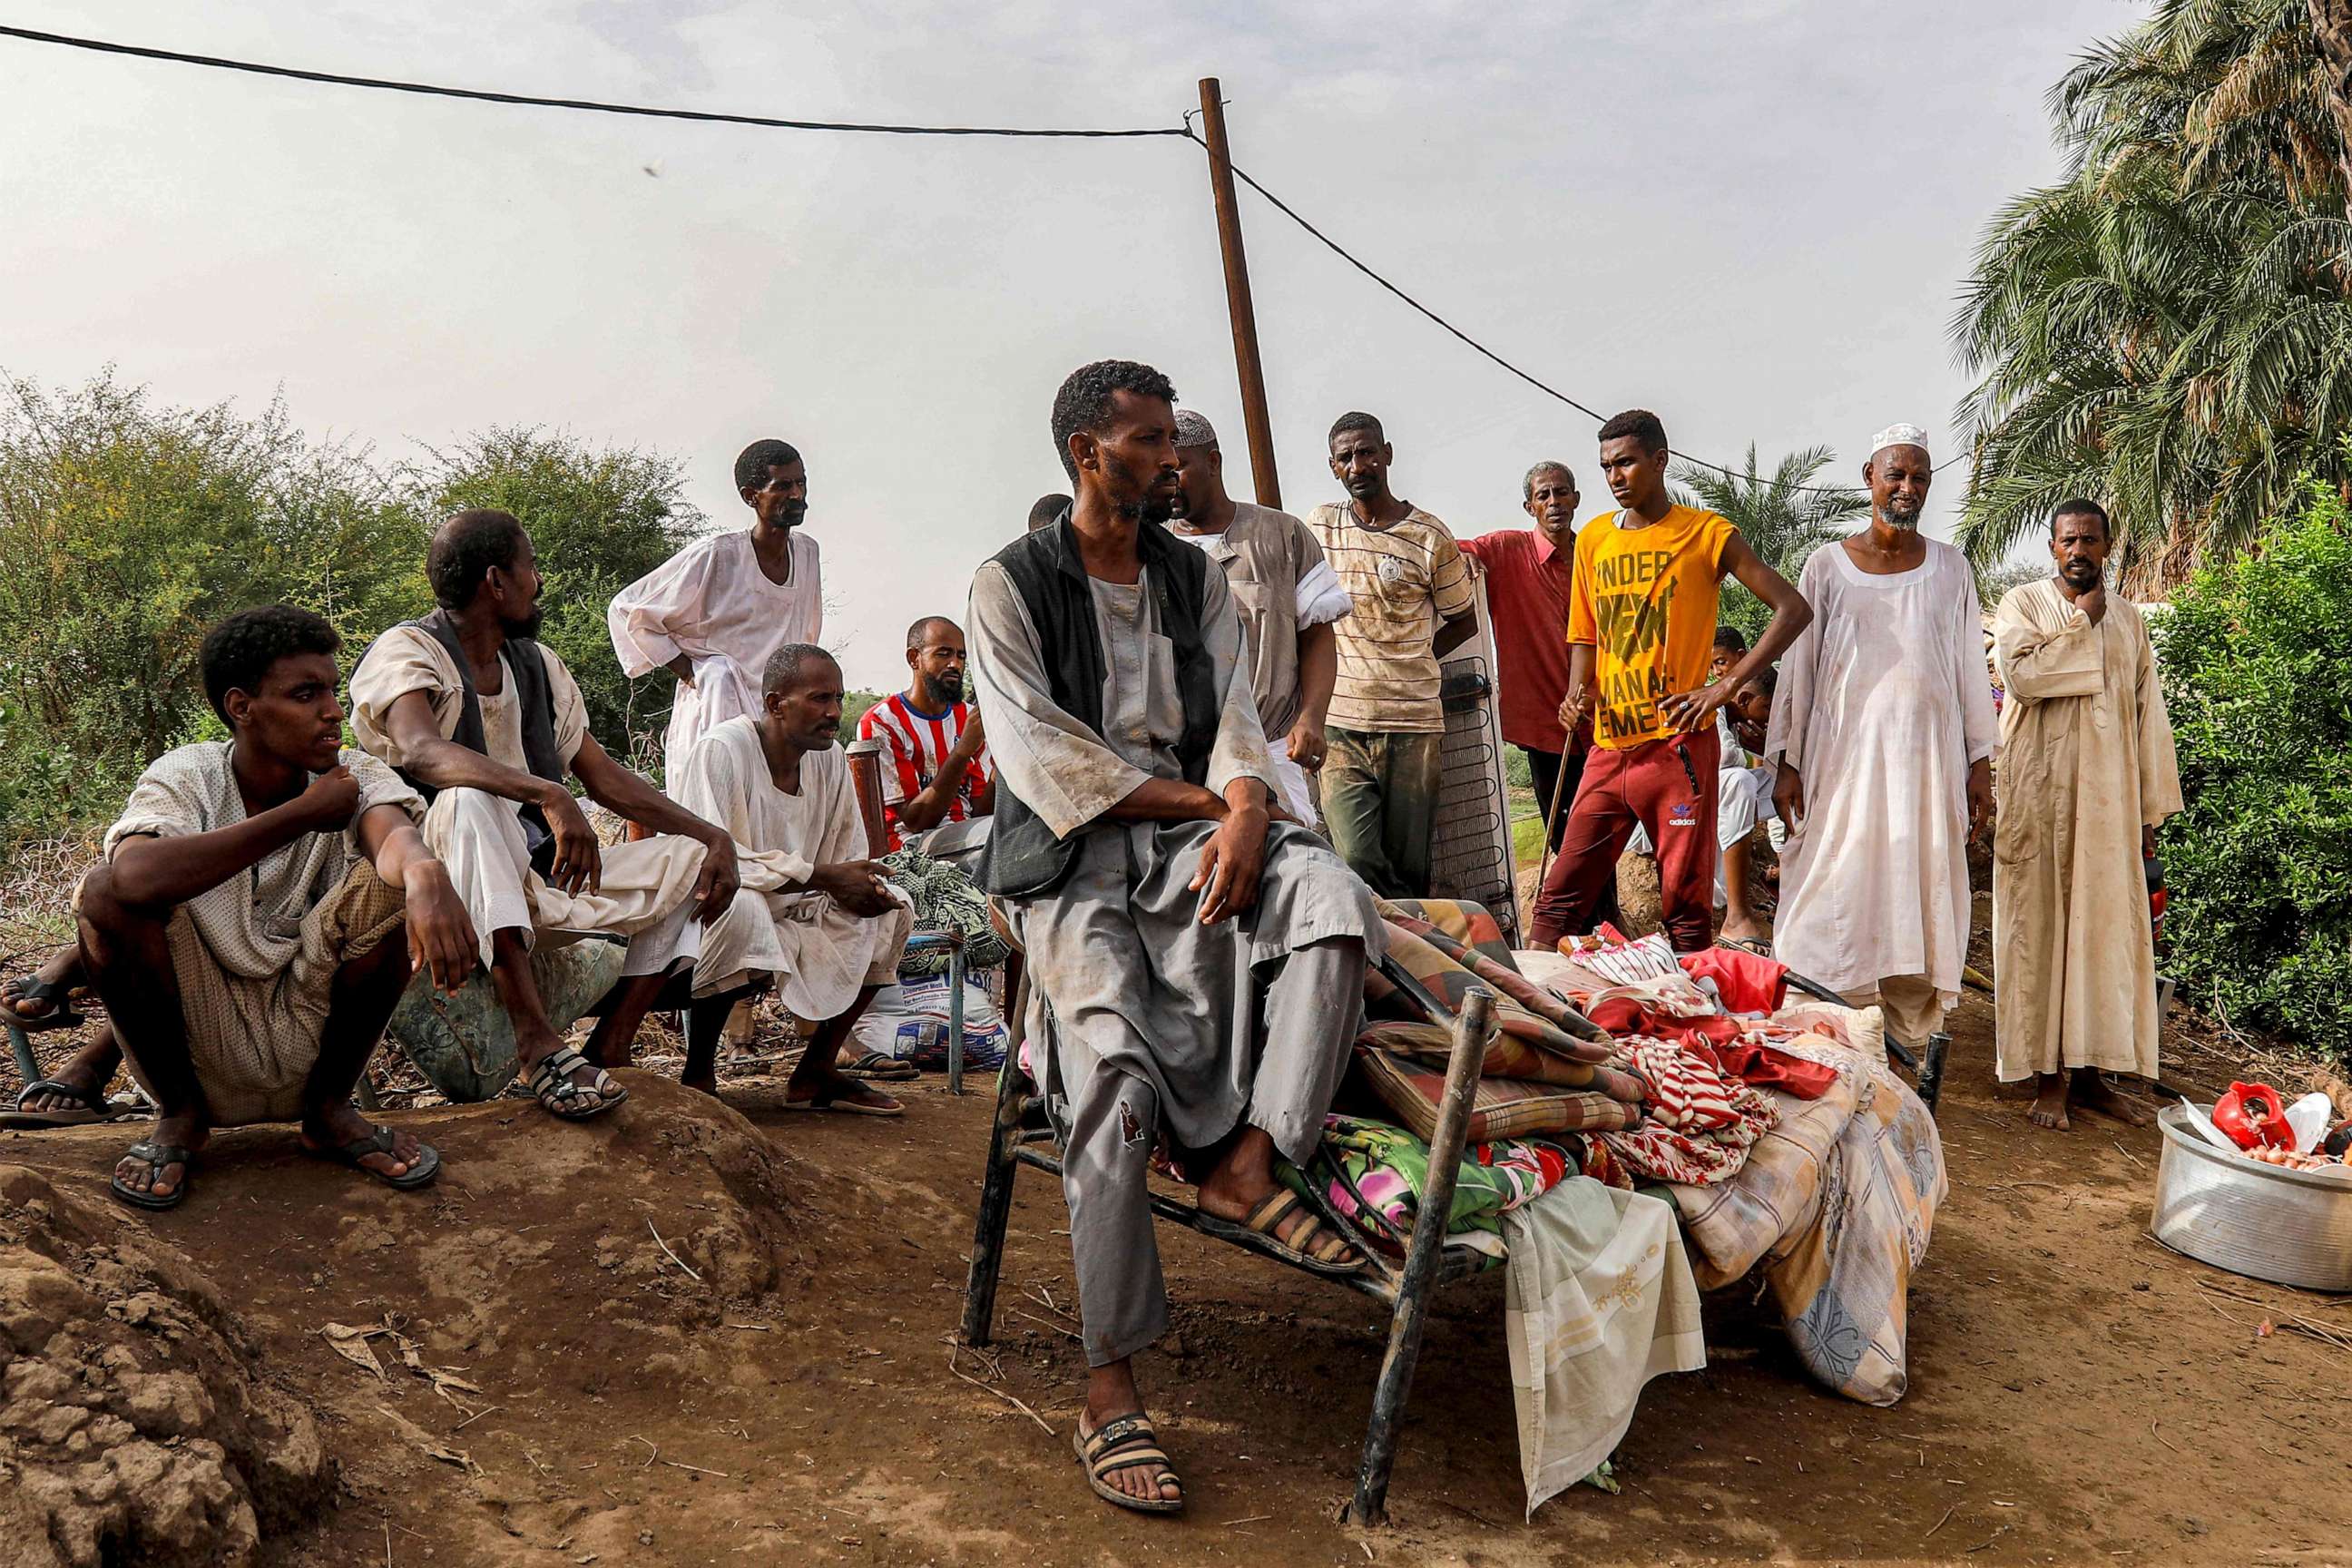 PHOTO: People sit outdoors on salvaged furniture in an area devastated by floods in al-Sagai north of Omdurman on August 6, 2023.